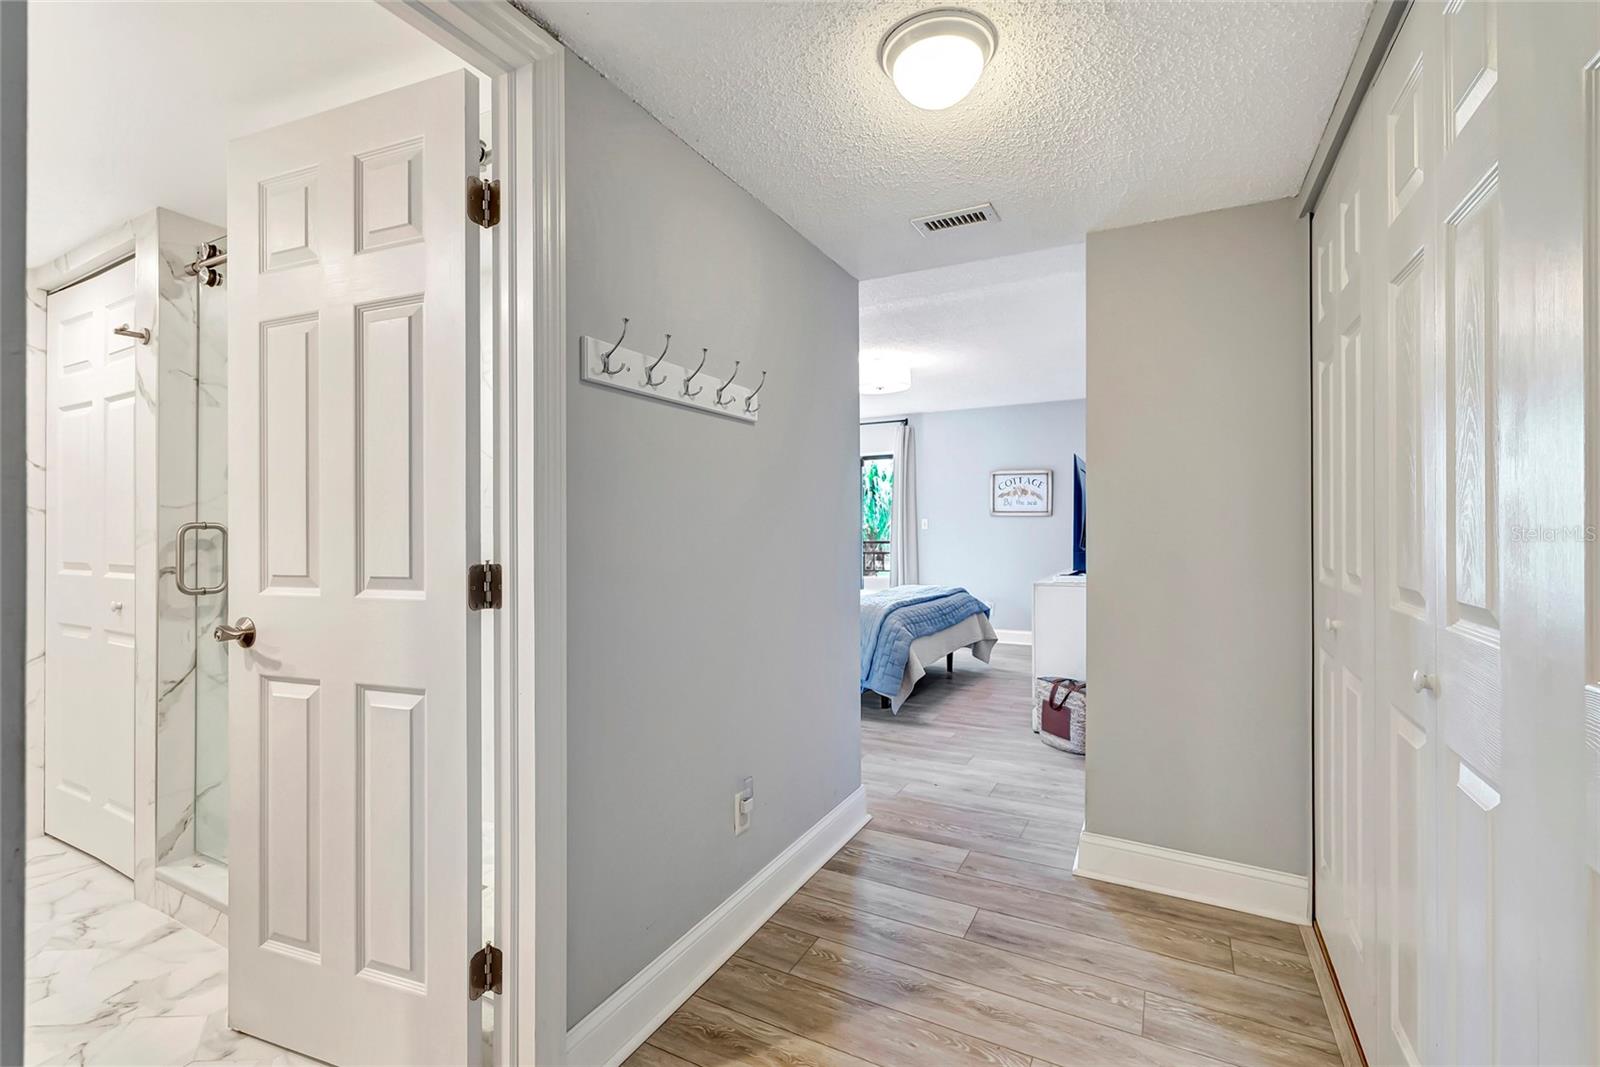 Follow the pathway from the primary bedroom to the second room, where comfort and charm await.